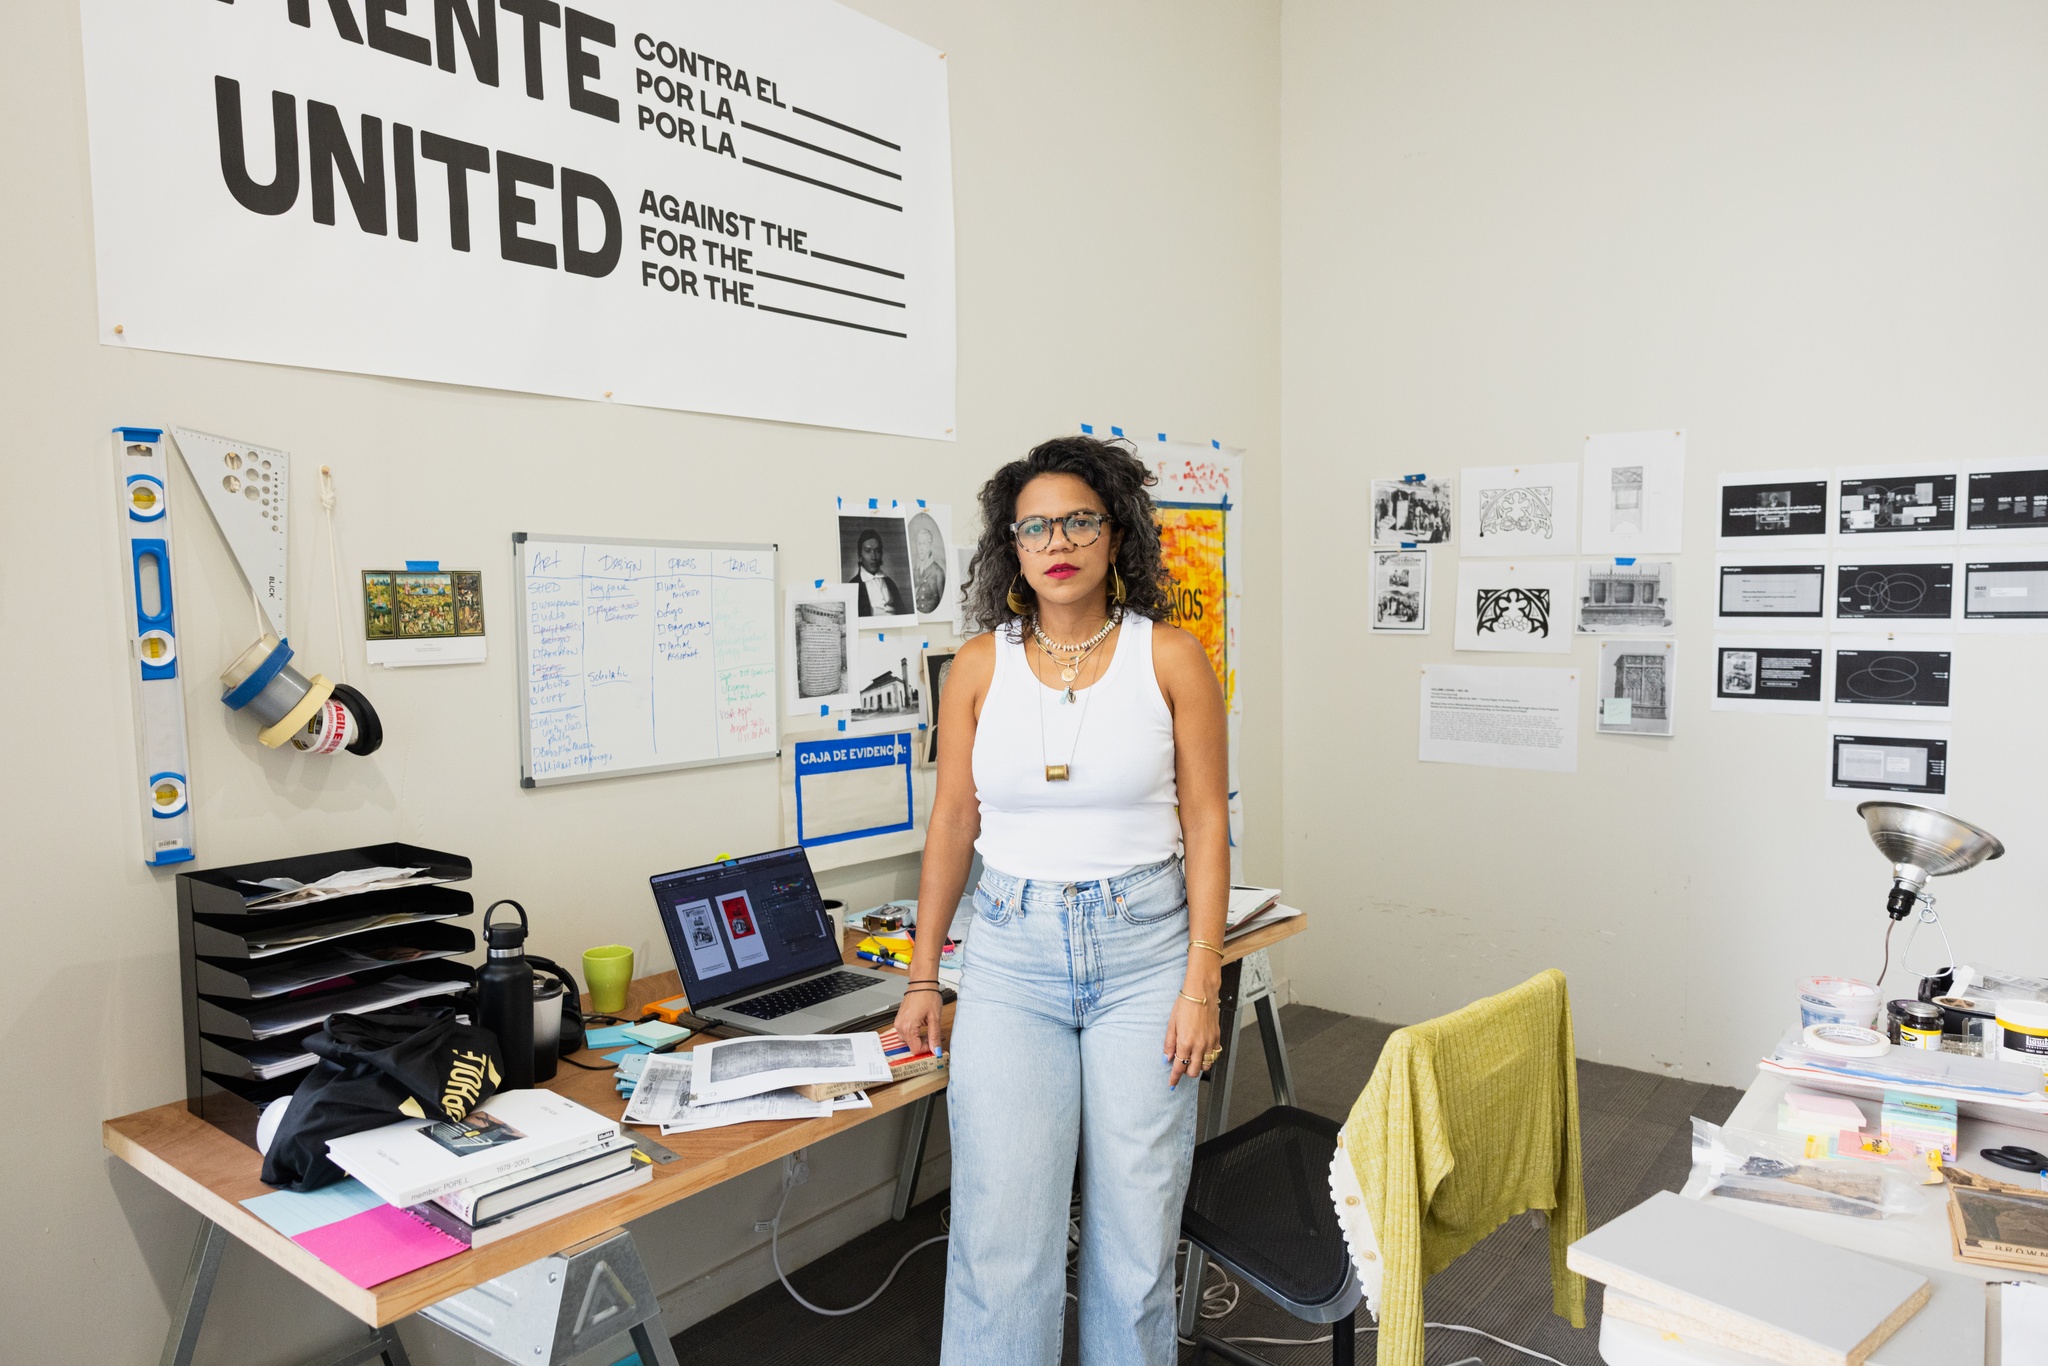 Dominican artist Lizania Cruz stands by a desk in her studio facing us. Lizania has wavy, shoulder length brown hair and wears glasses, a white tank top, and pale blue jeans. Her desk is covered with an open laptop computer and piles of papers. The walls behind her are covered in print outs and posters and sketches that are taped to the walls.